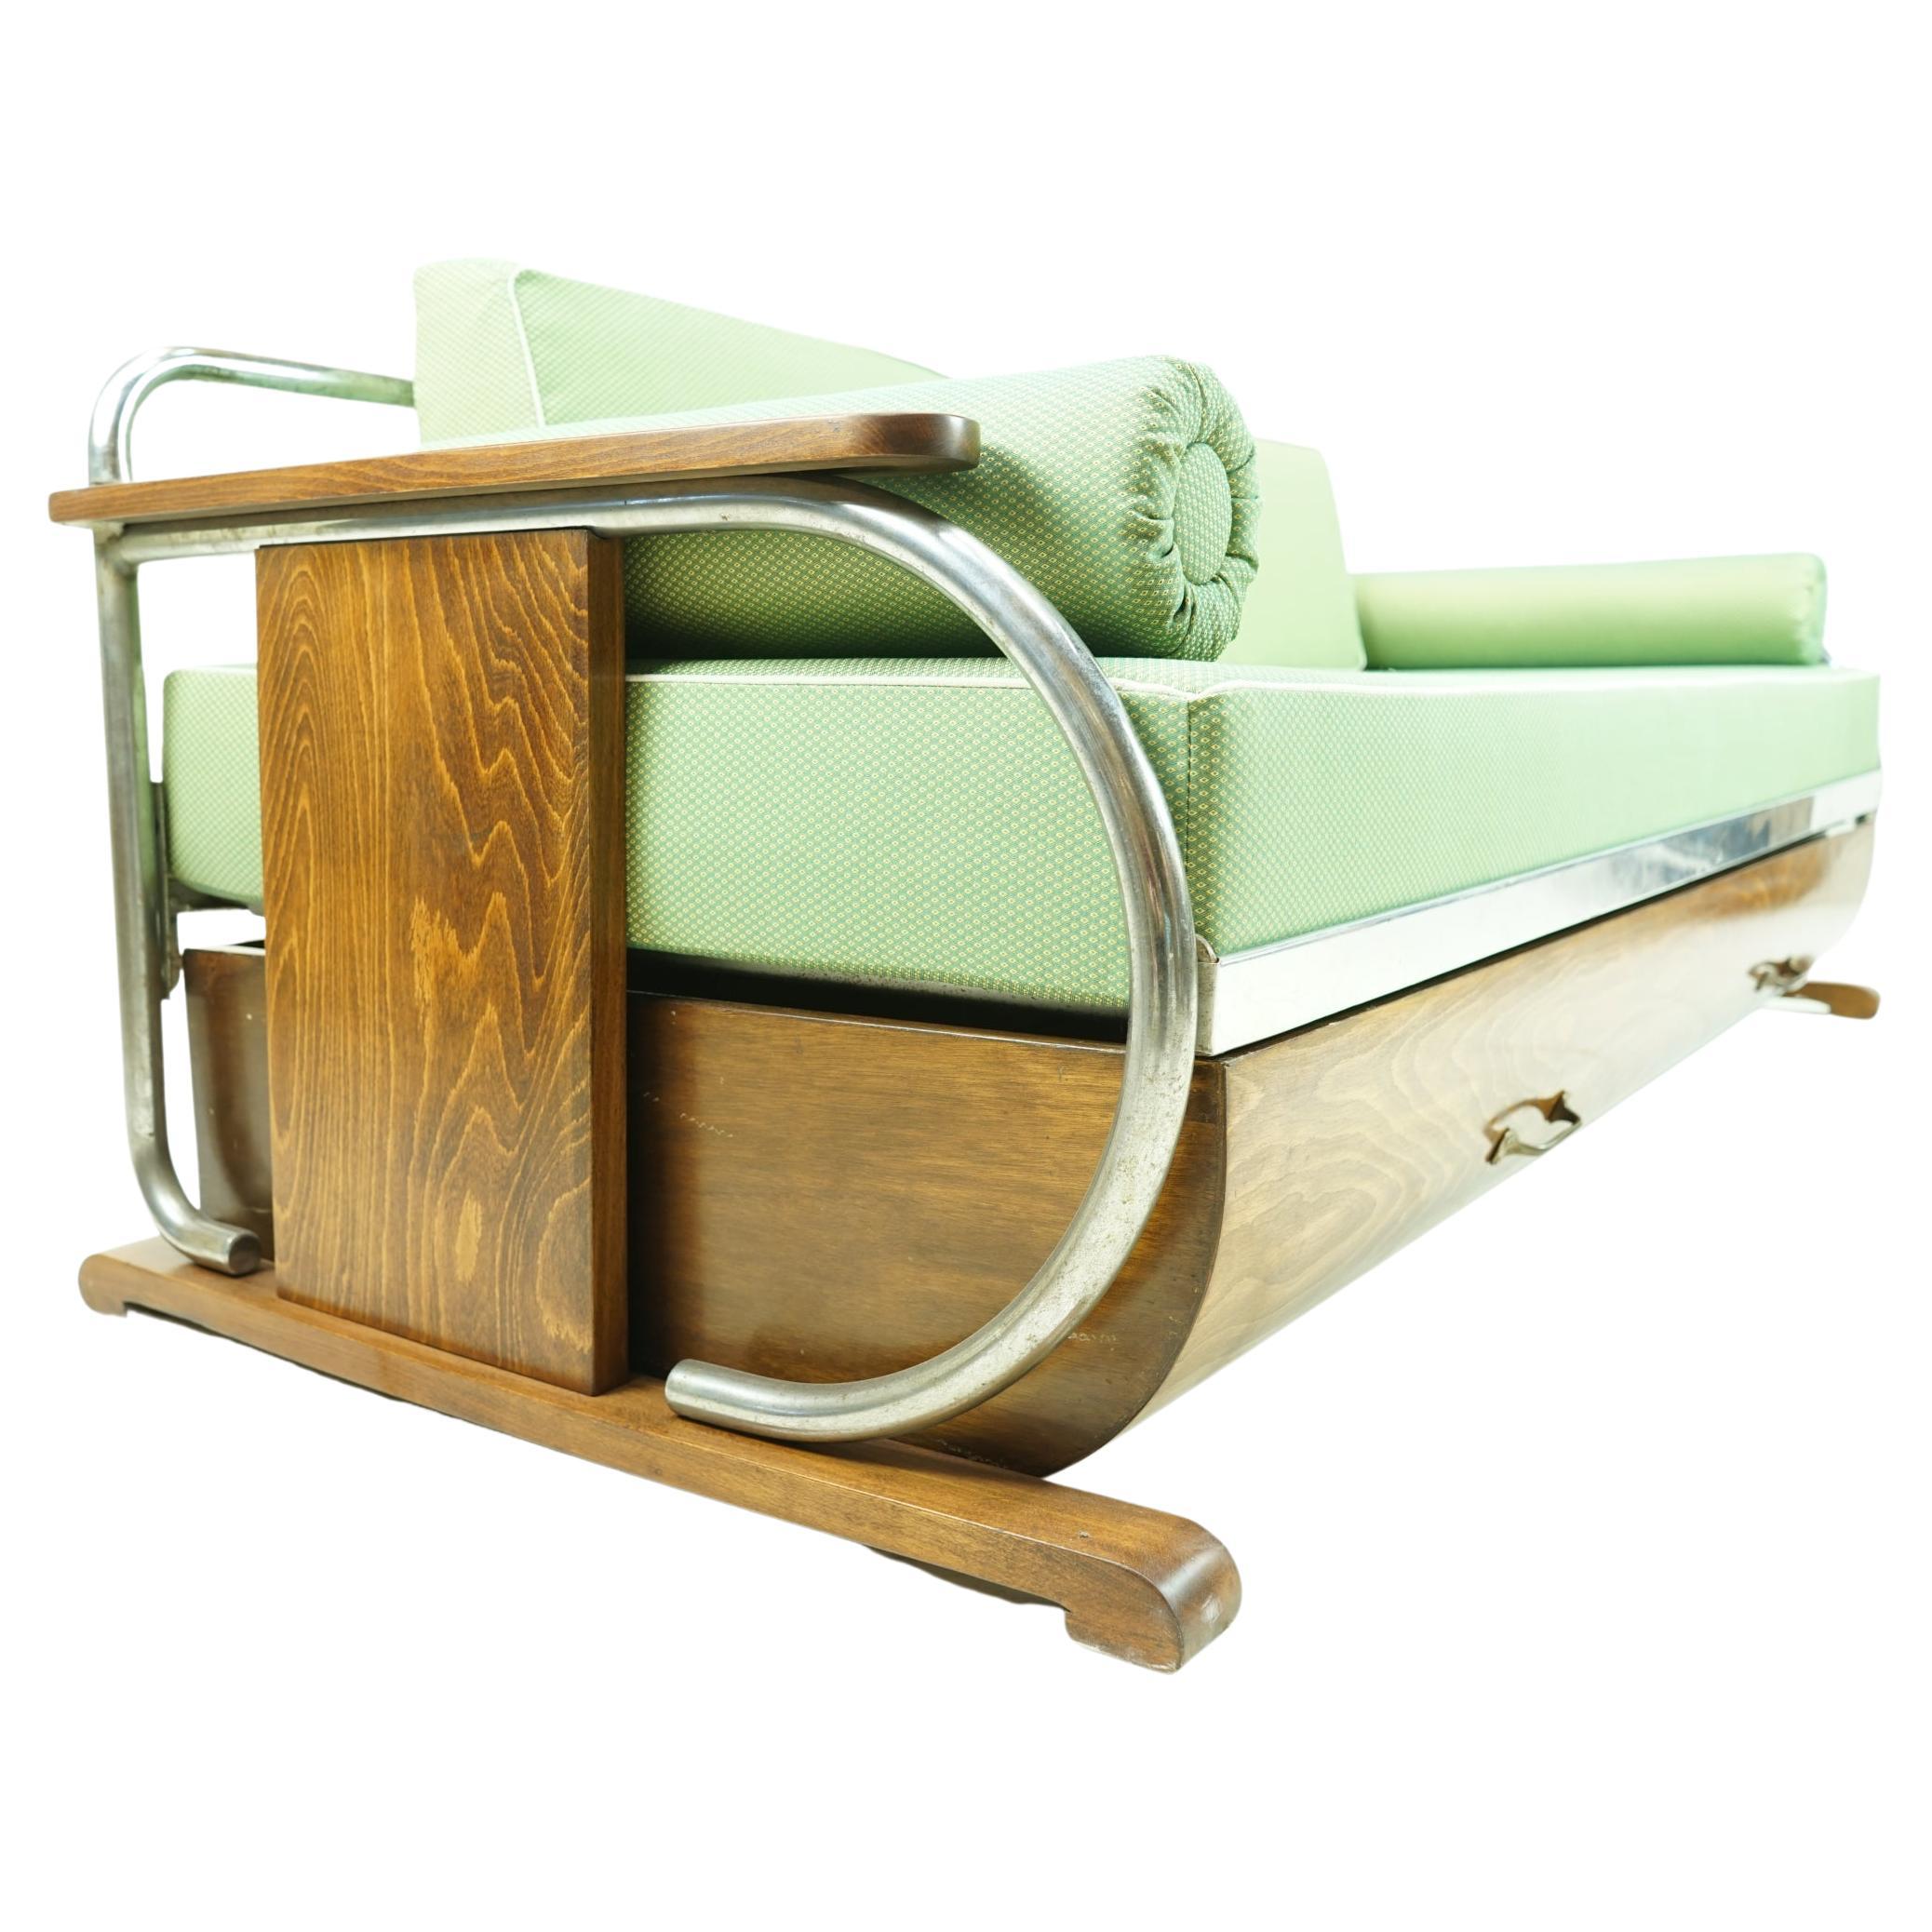 Bauhaus Sofa / Daybed by Gottwald with Drawer Box, 1935